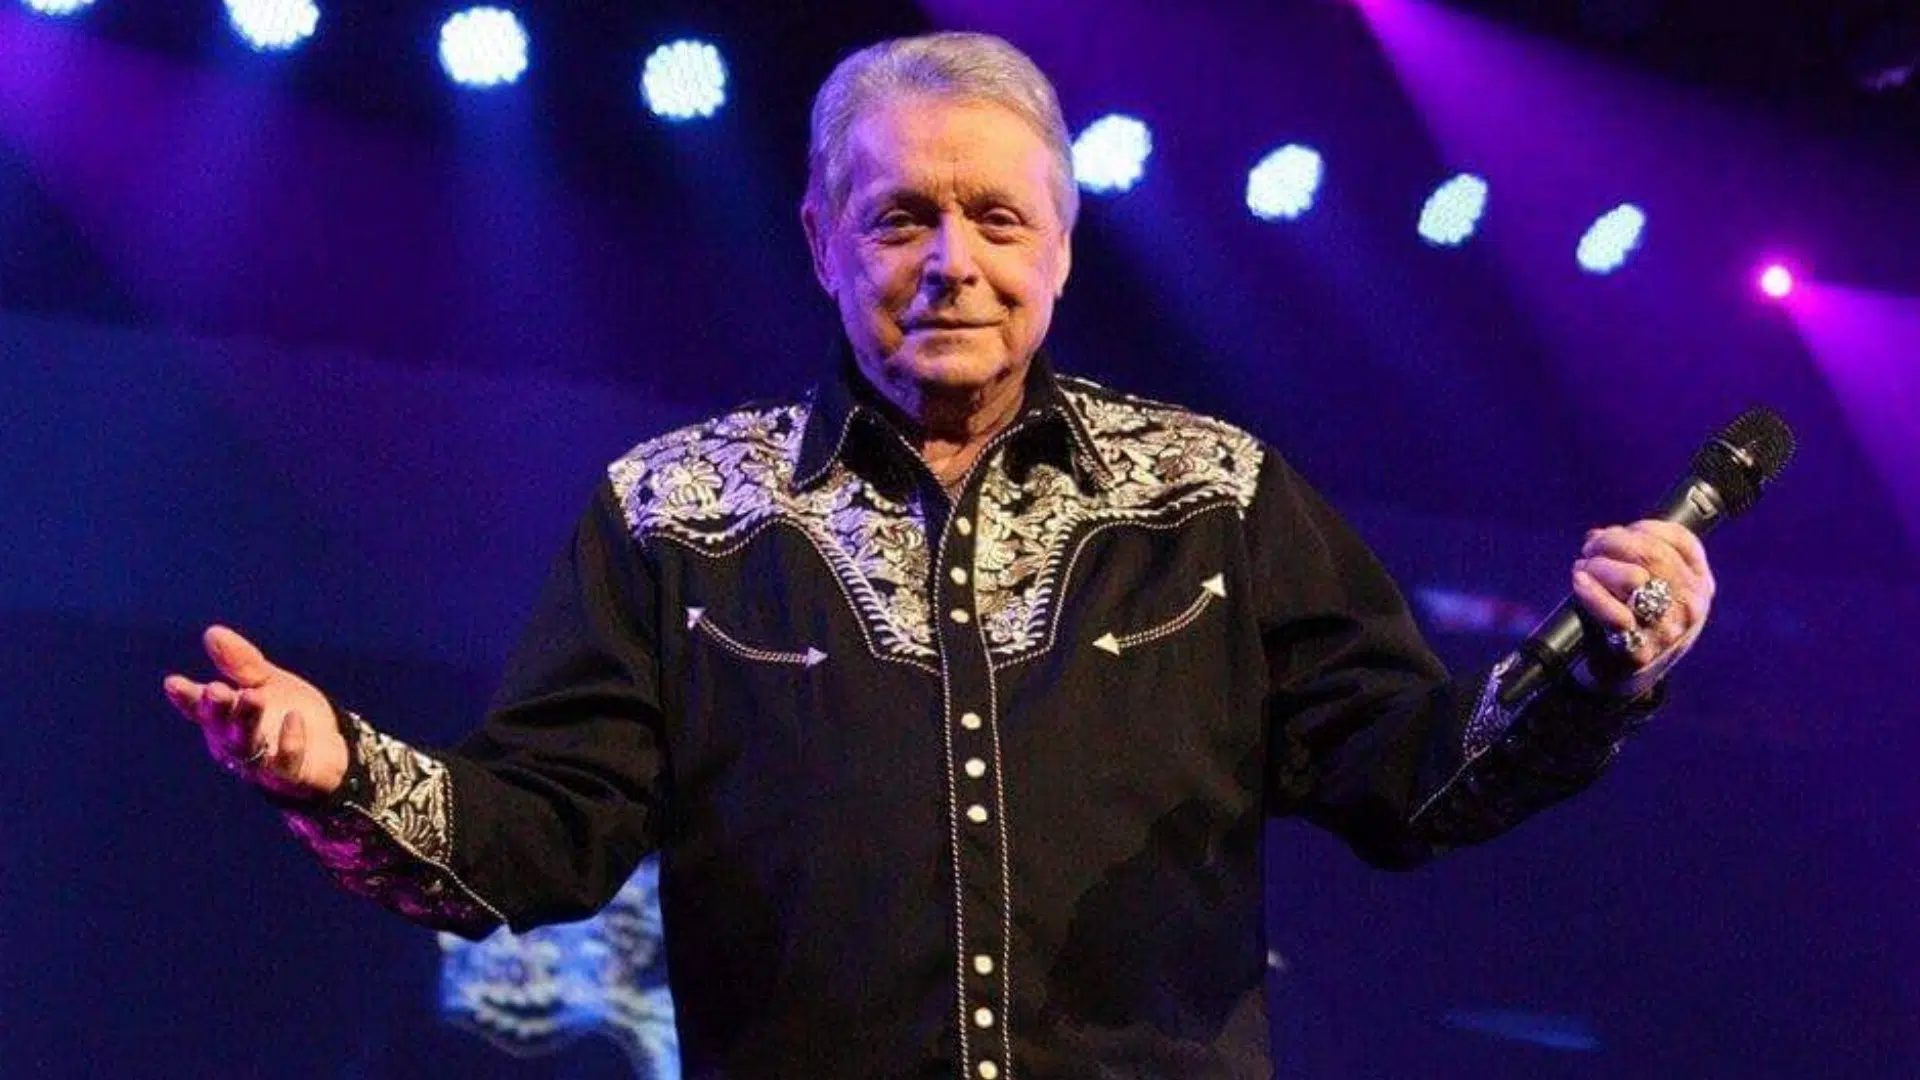 Country music legend Mickey Gilley has passed away at 86